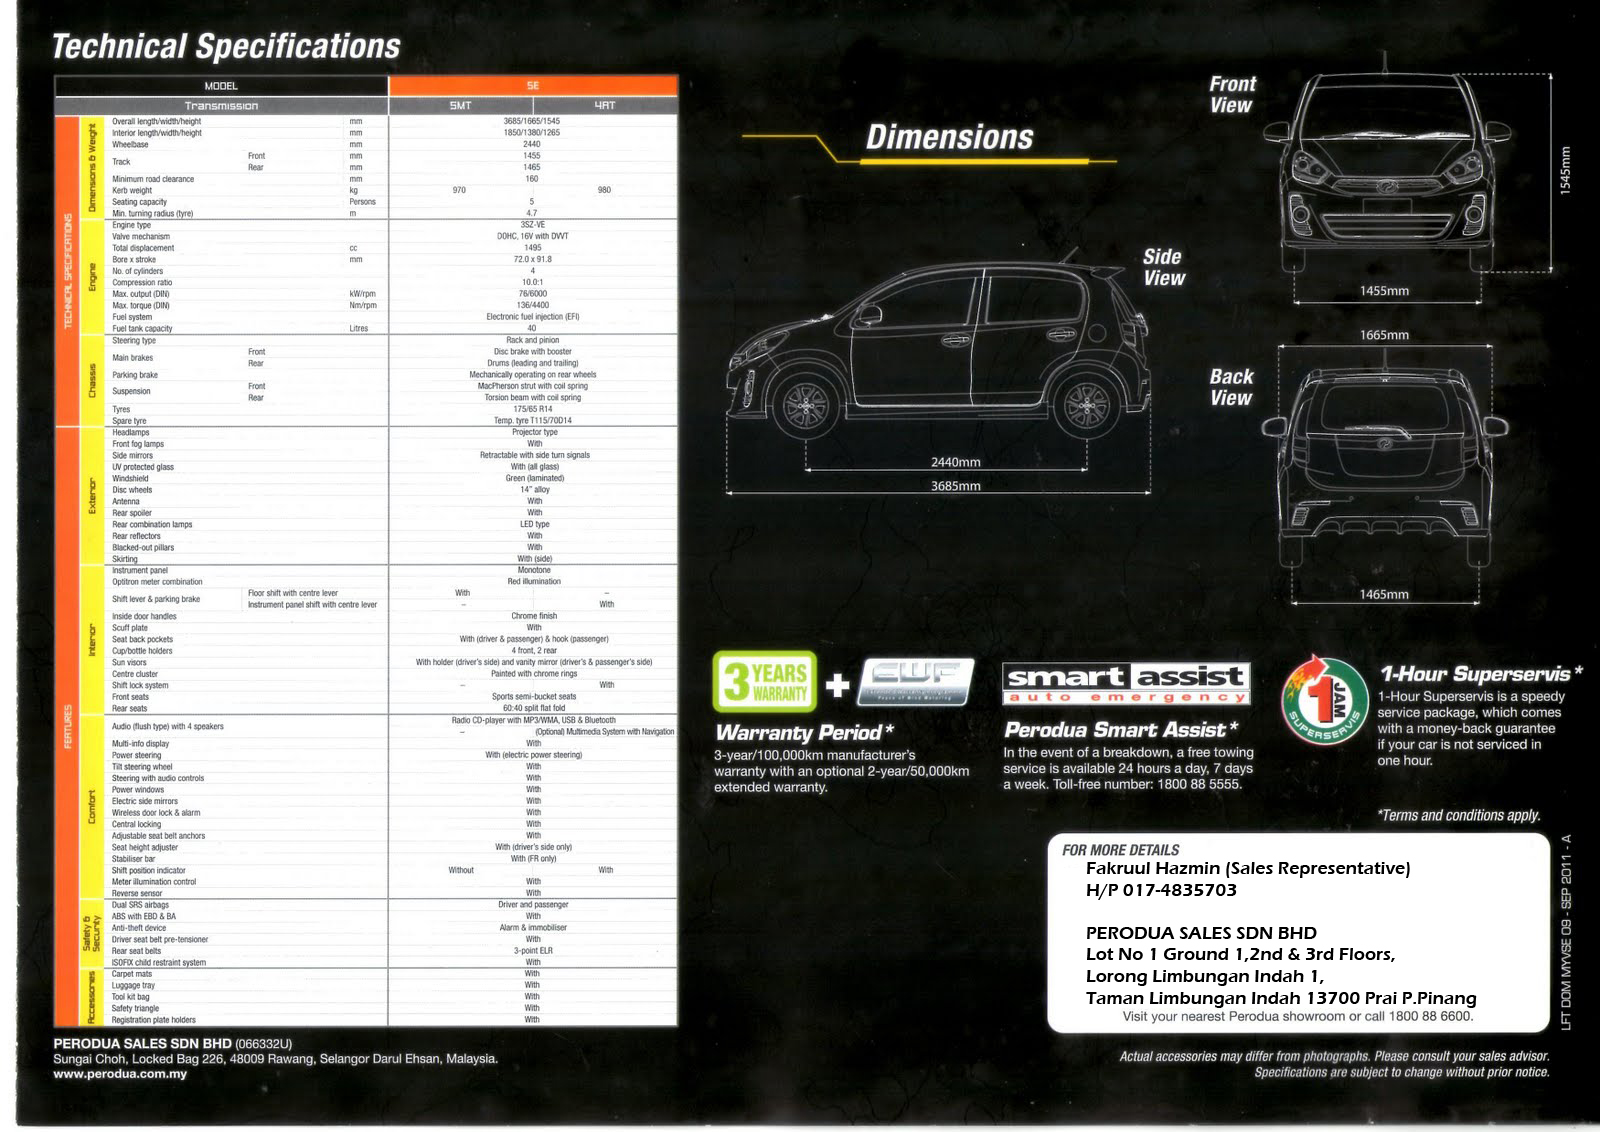 Perodua Promotion - 017-4835703: Official Brochure for New 